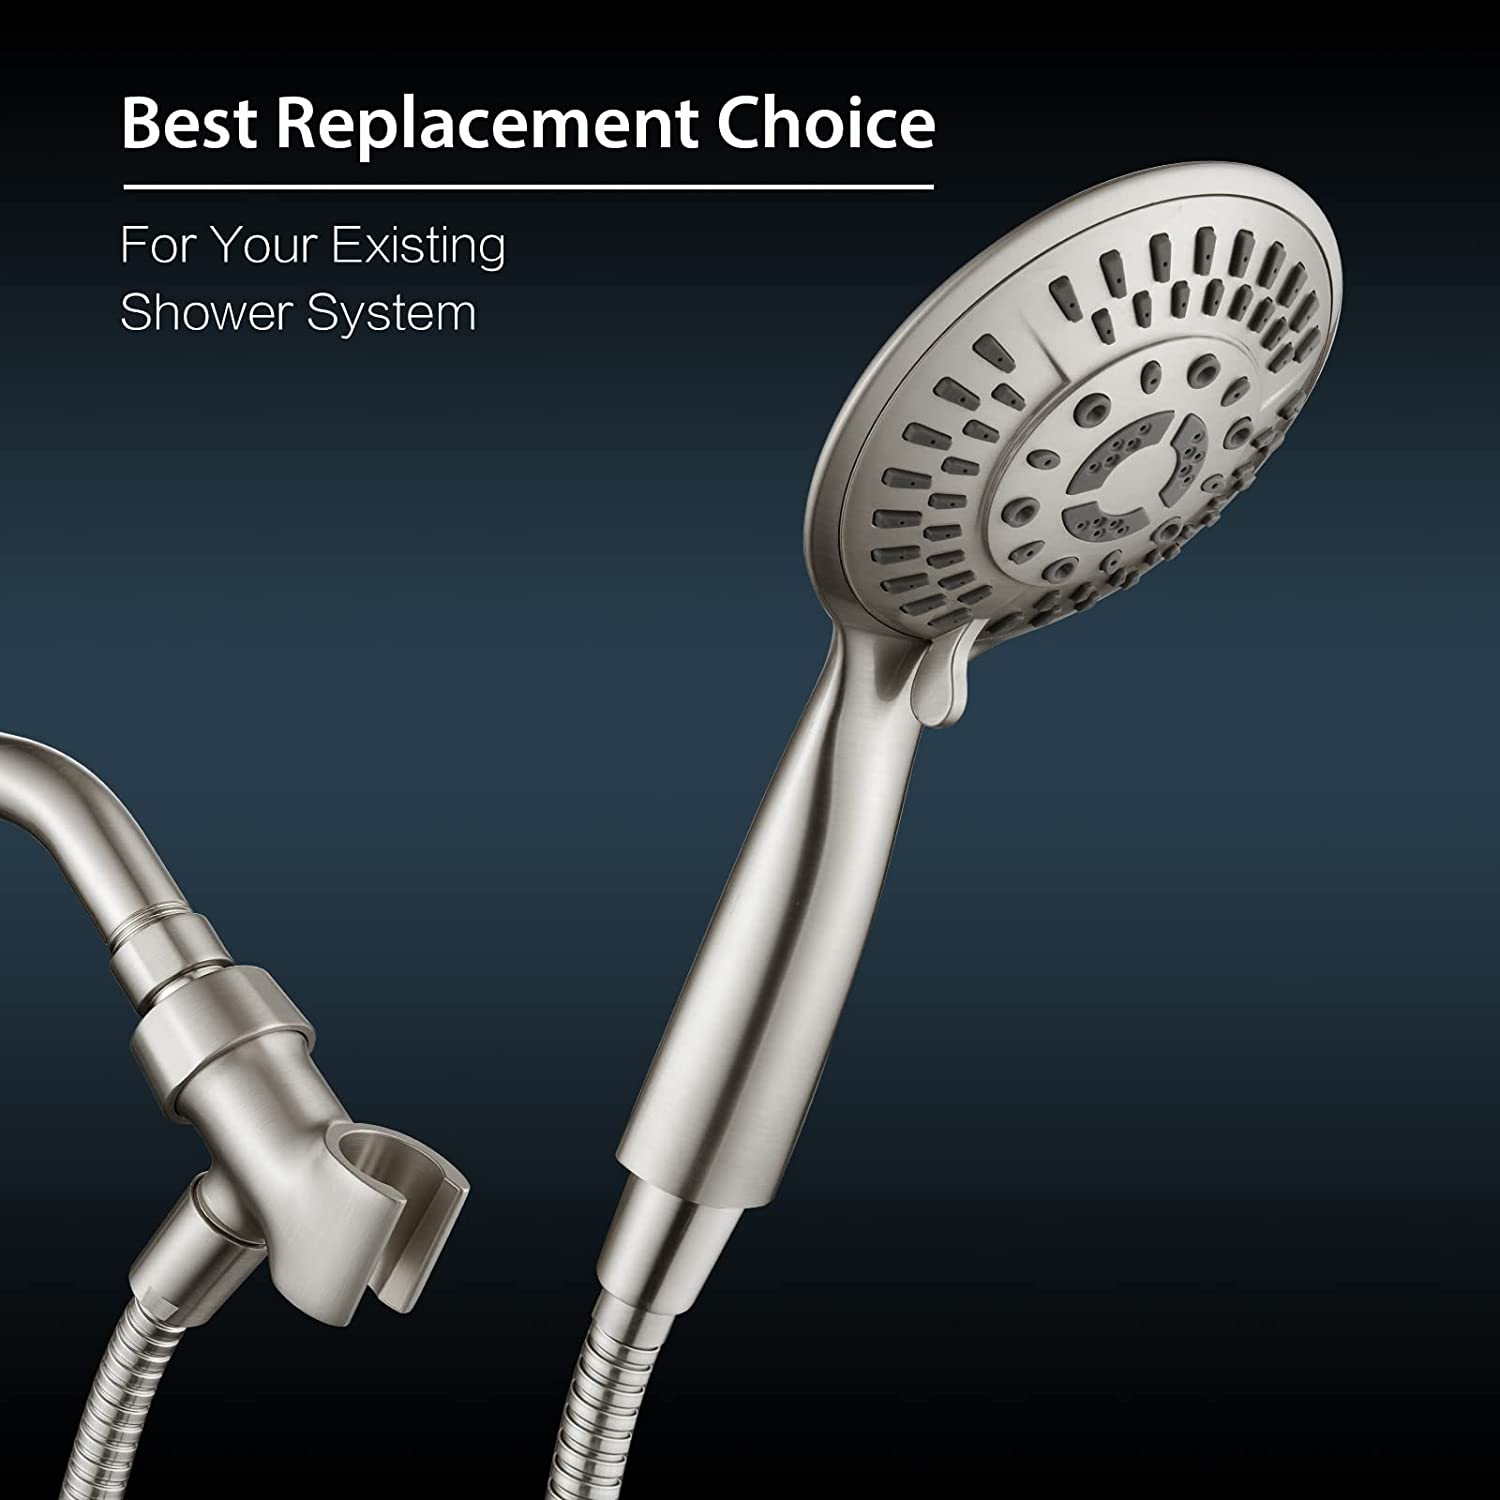 BRIGHT SHOWERS Handheld Shower Head Holder with Dual Angle